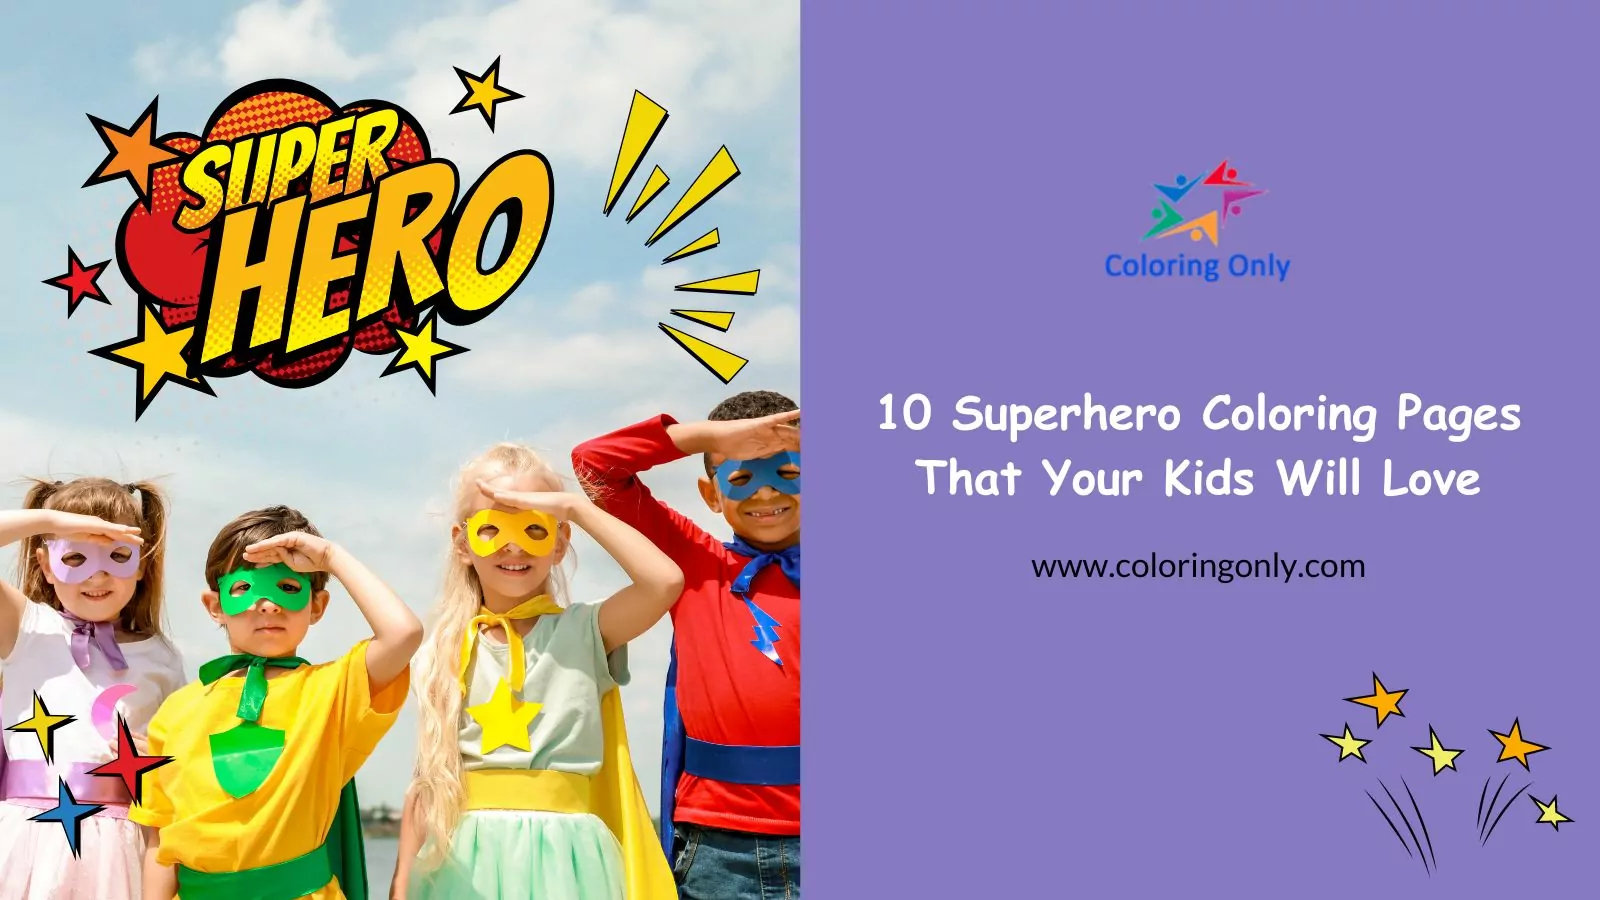 10 Superhero Coloring Pages That Your Kids Will Love